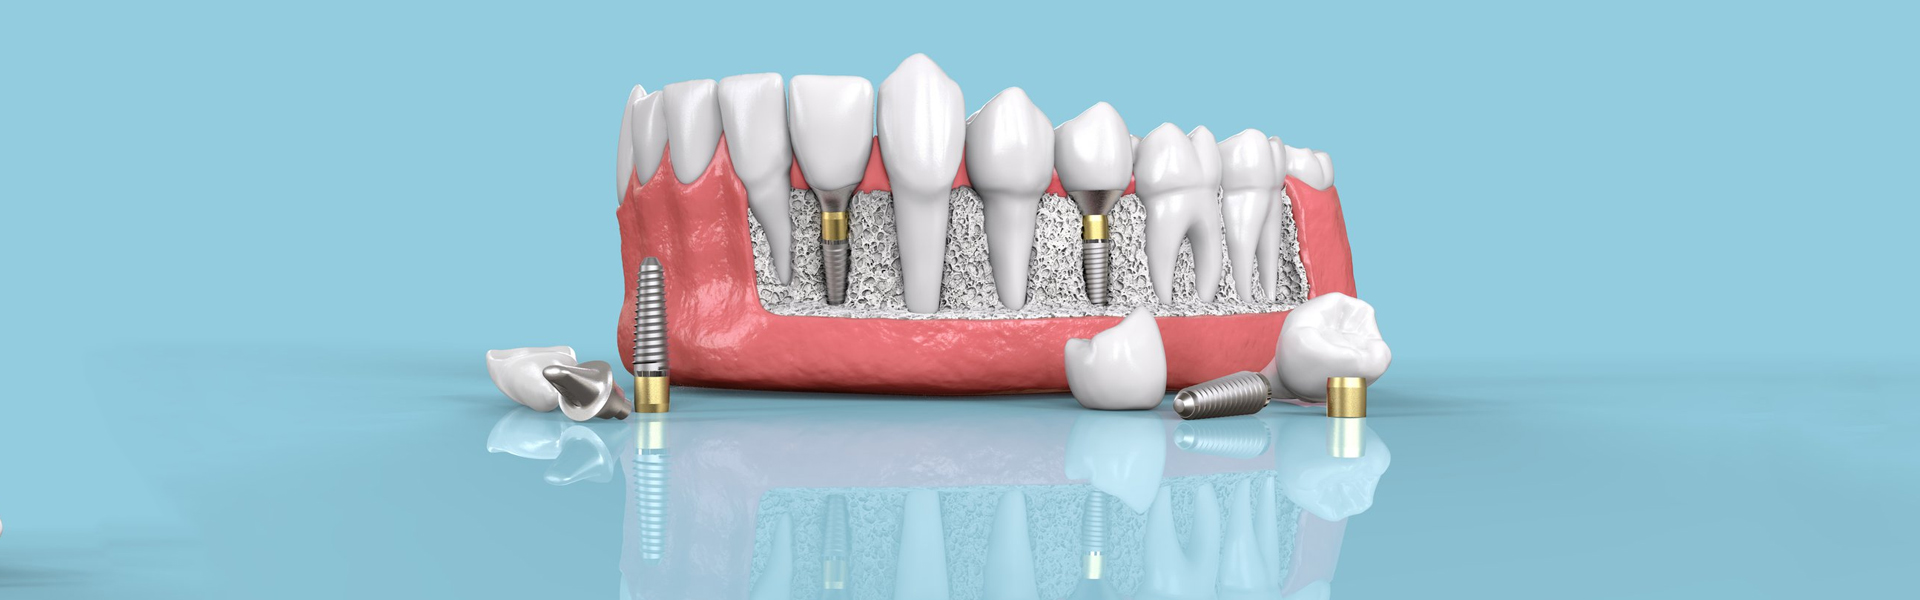 Dental Implants Aftercare Tips from a Dentist